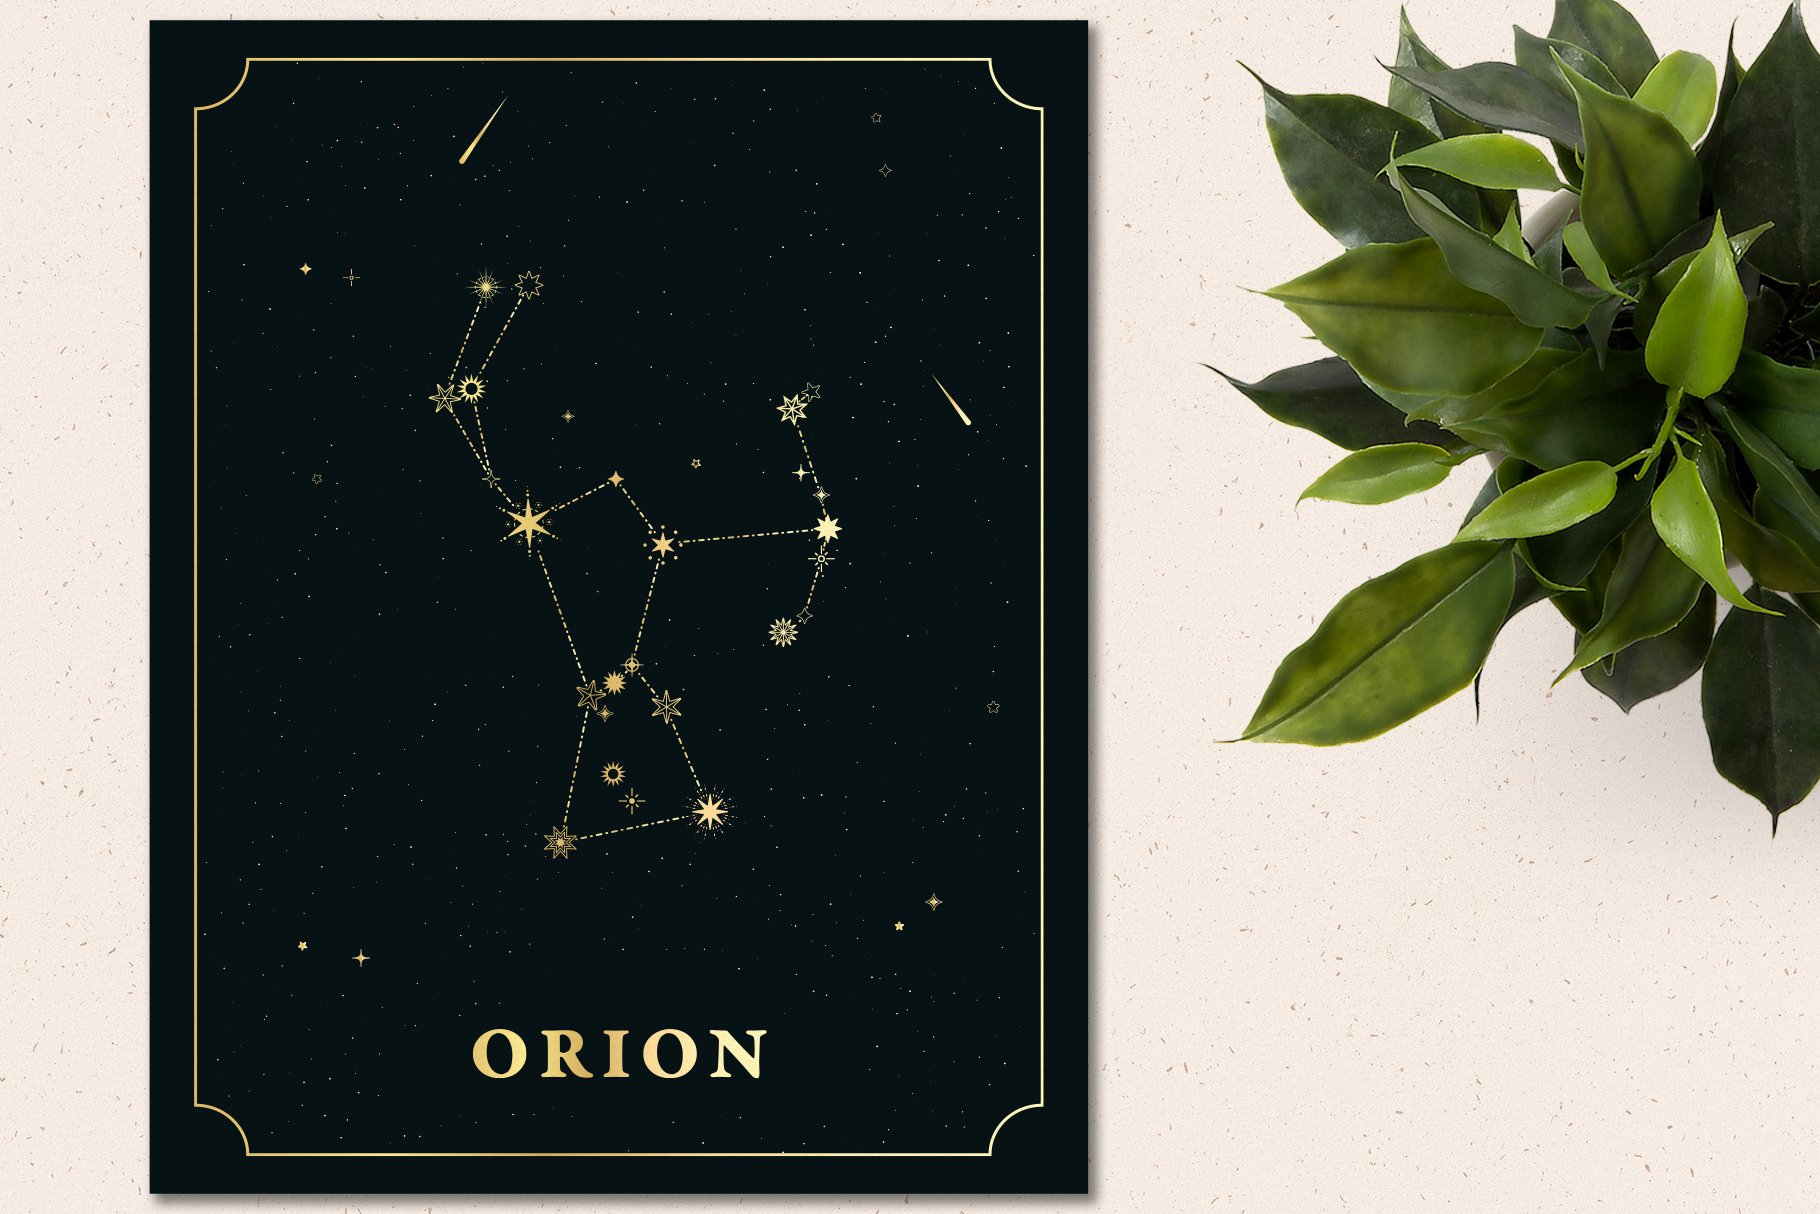 88 Star Constellations preview image.